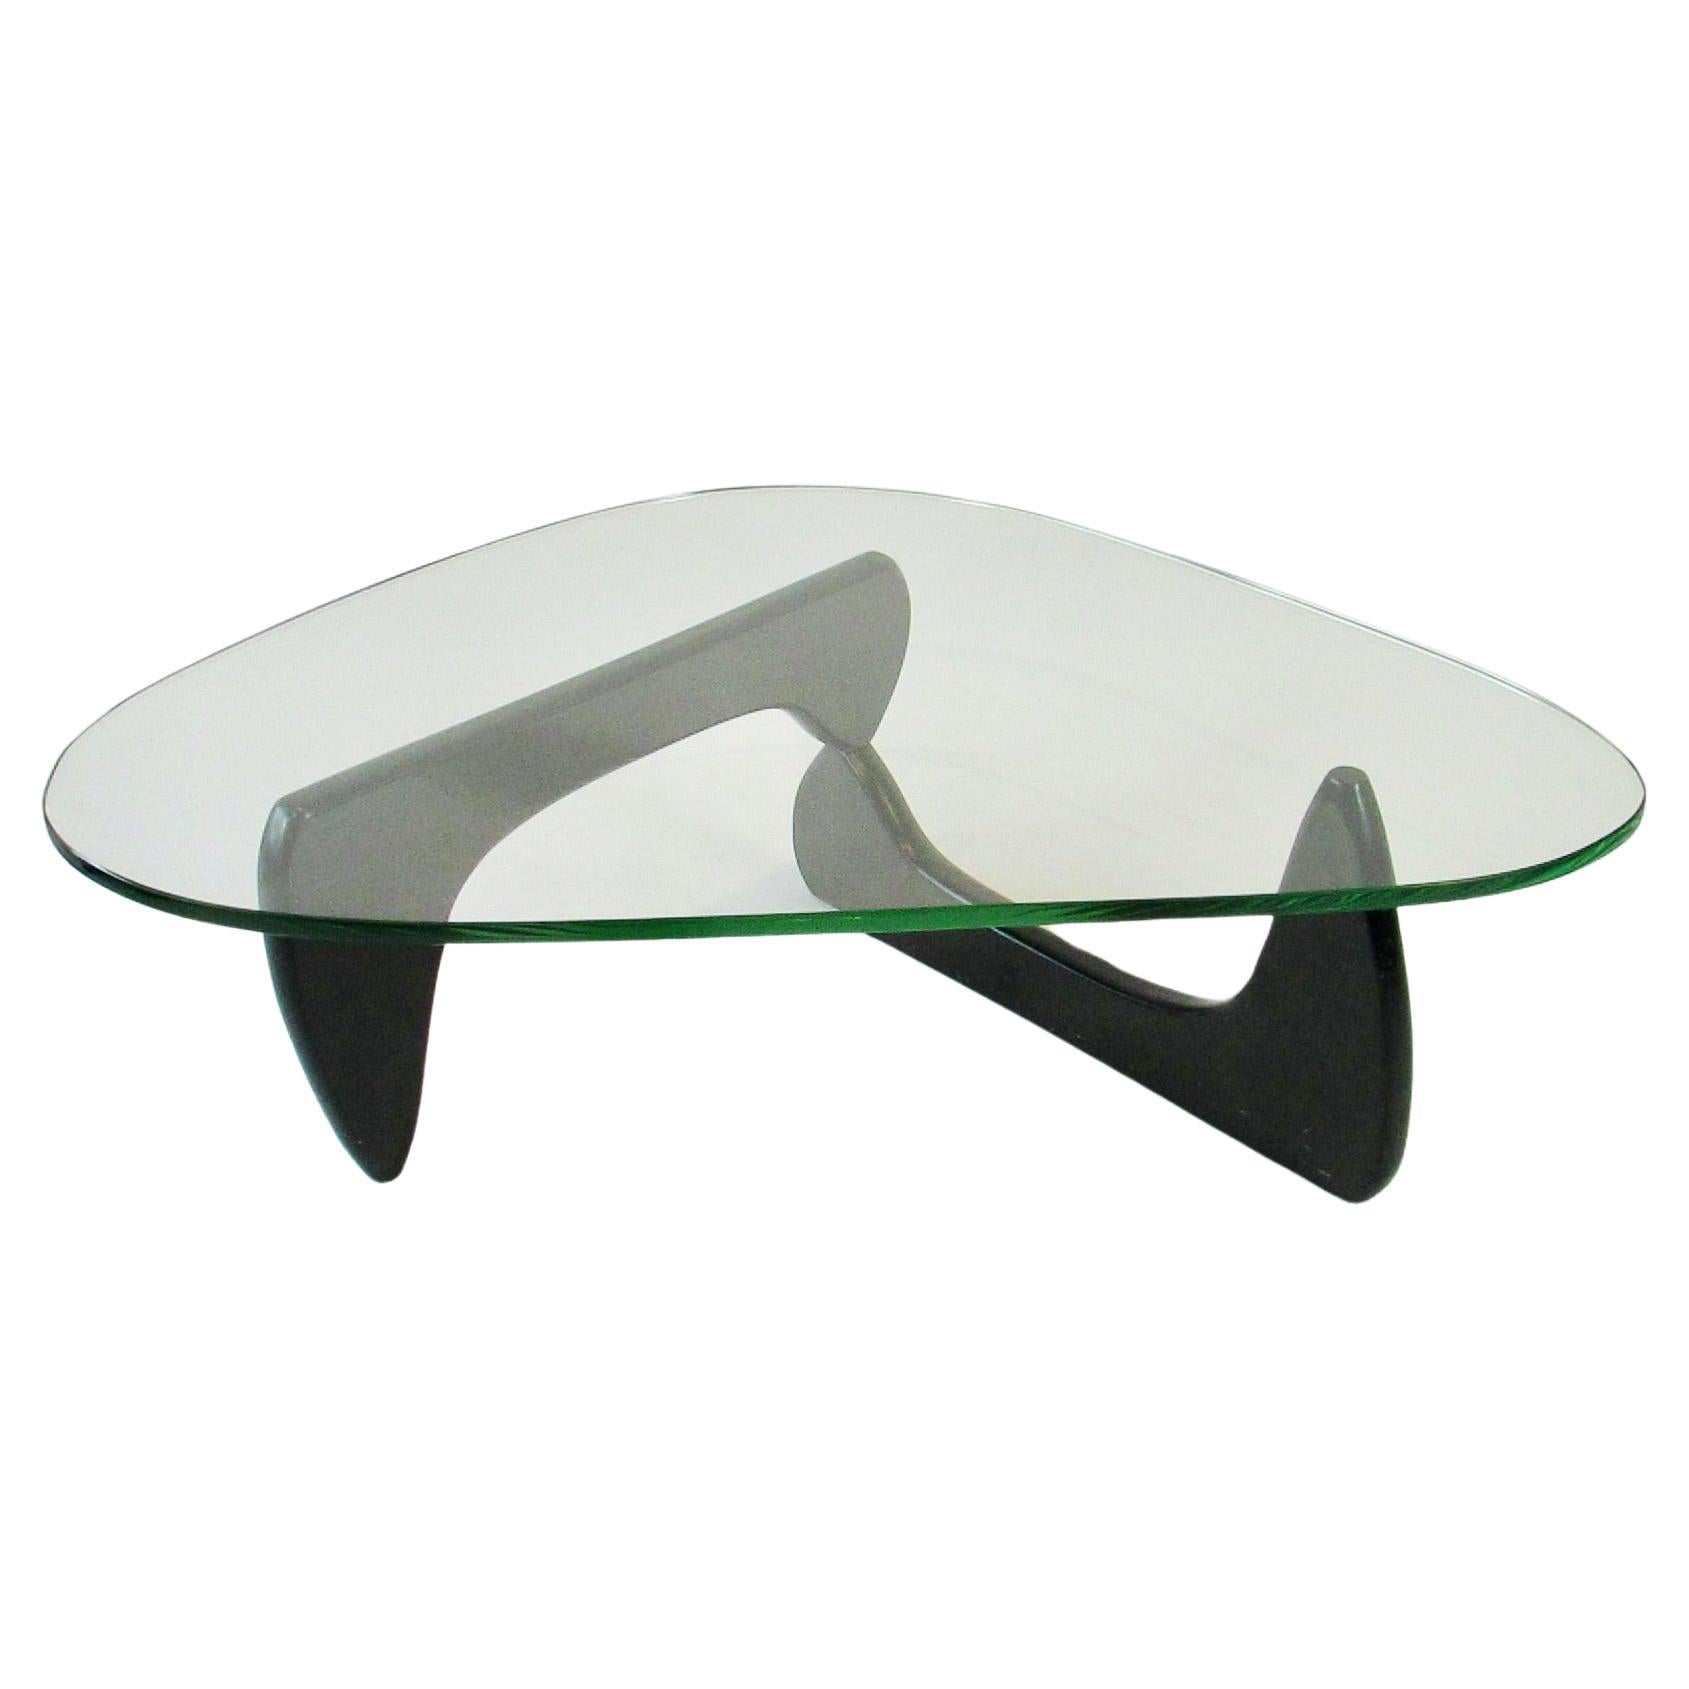 What is a Noguchi table made of?